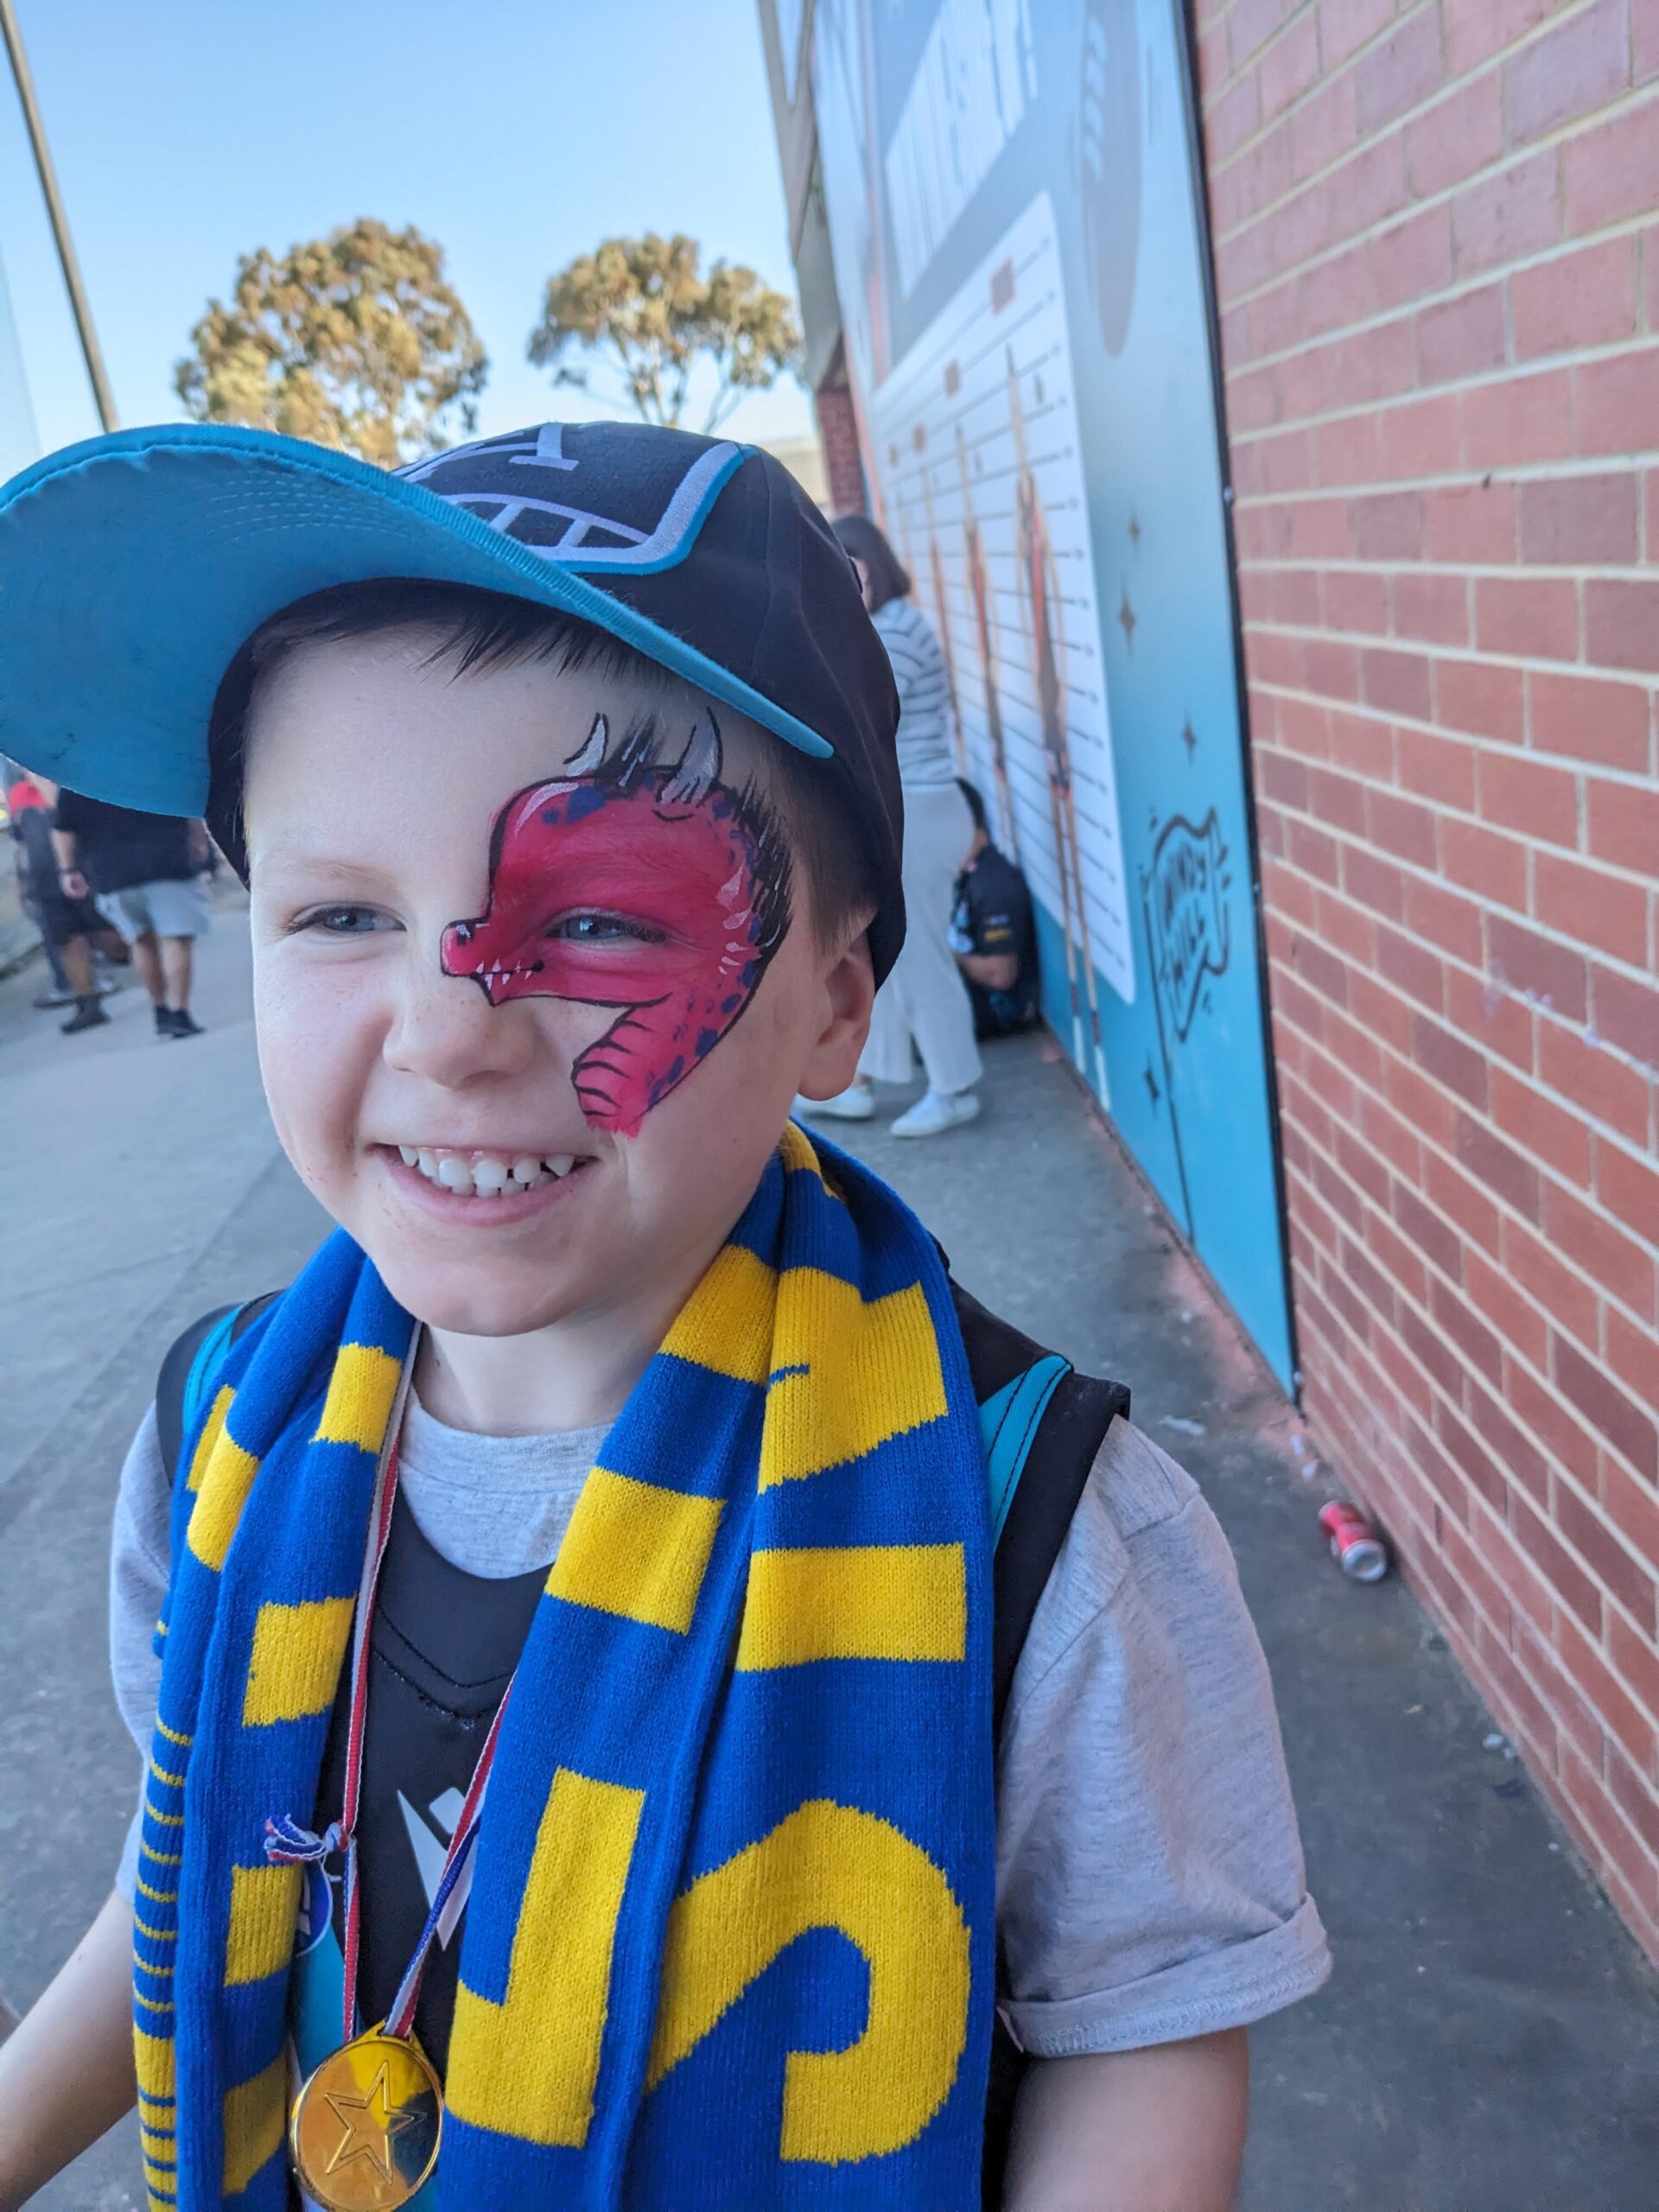 face painting australia red dinosaur face paint design on boy at sports game melbourne australia affordable face painting near me